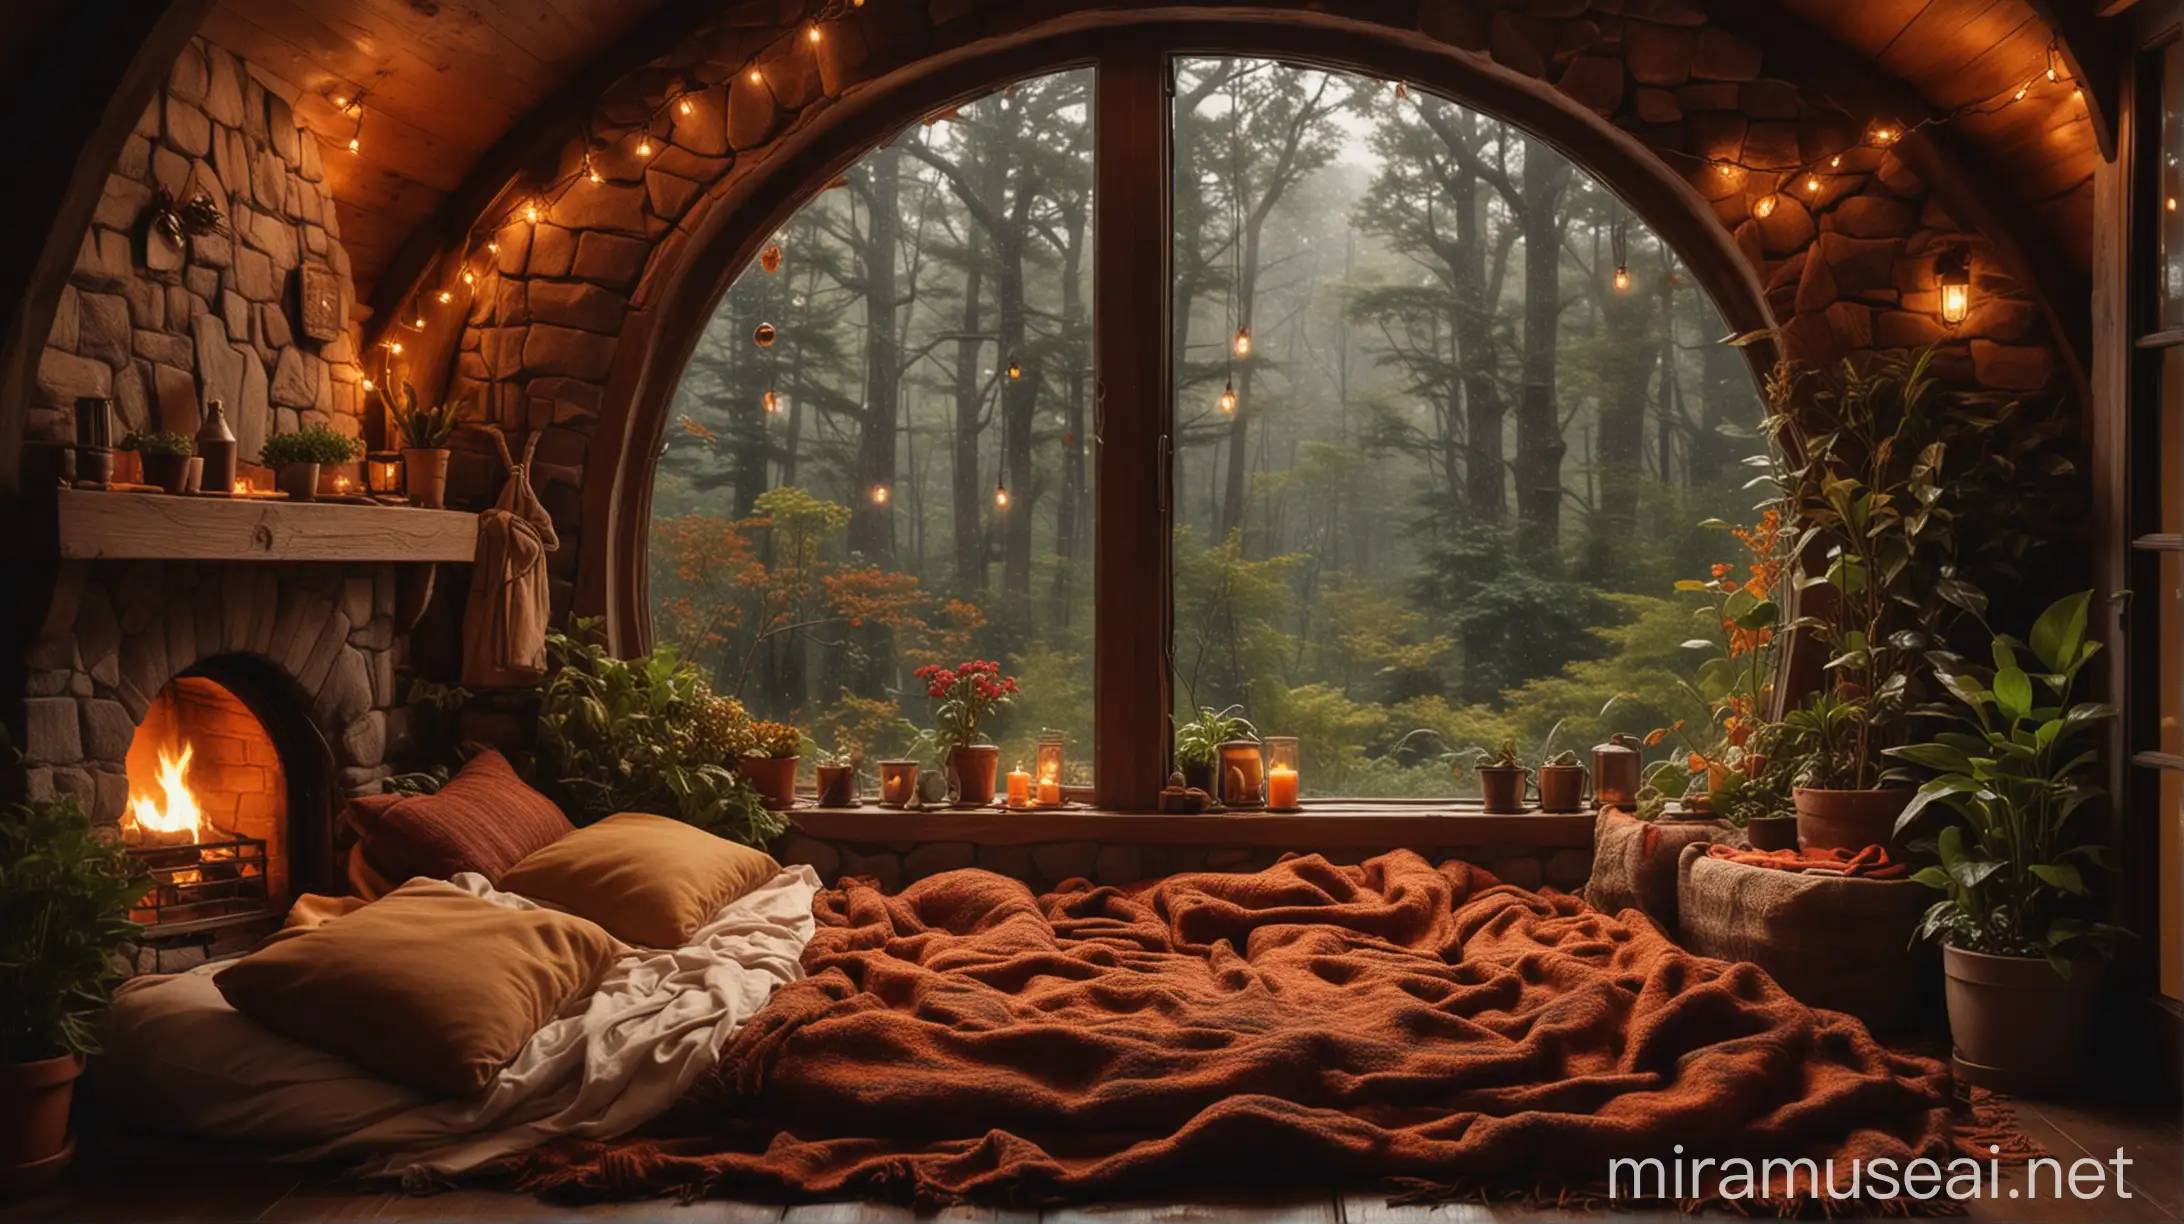 Cozy hobbit room, with two small cozy plants, pillows, string lights, blankets, a roaring fireplace, big window with a rainy fall night deep forest view., Mysterious with fireplace sia view